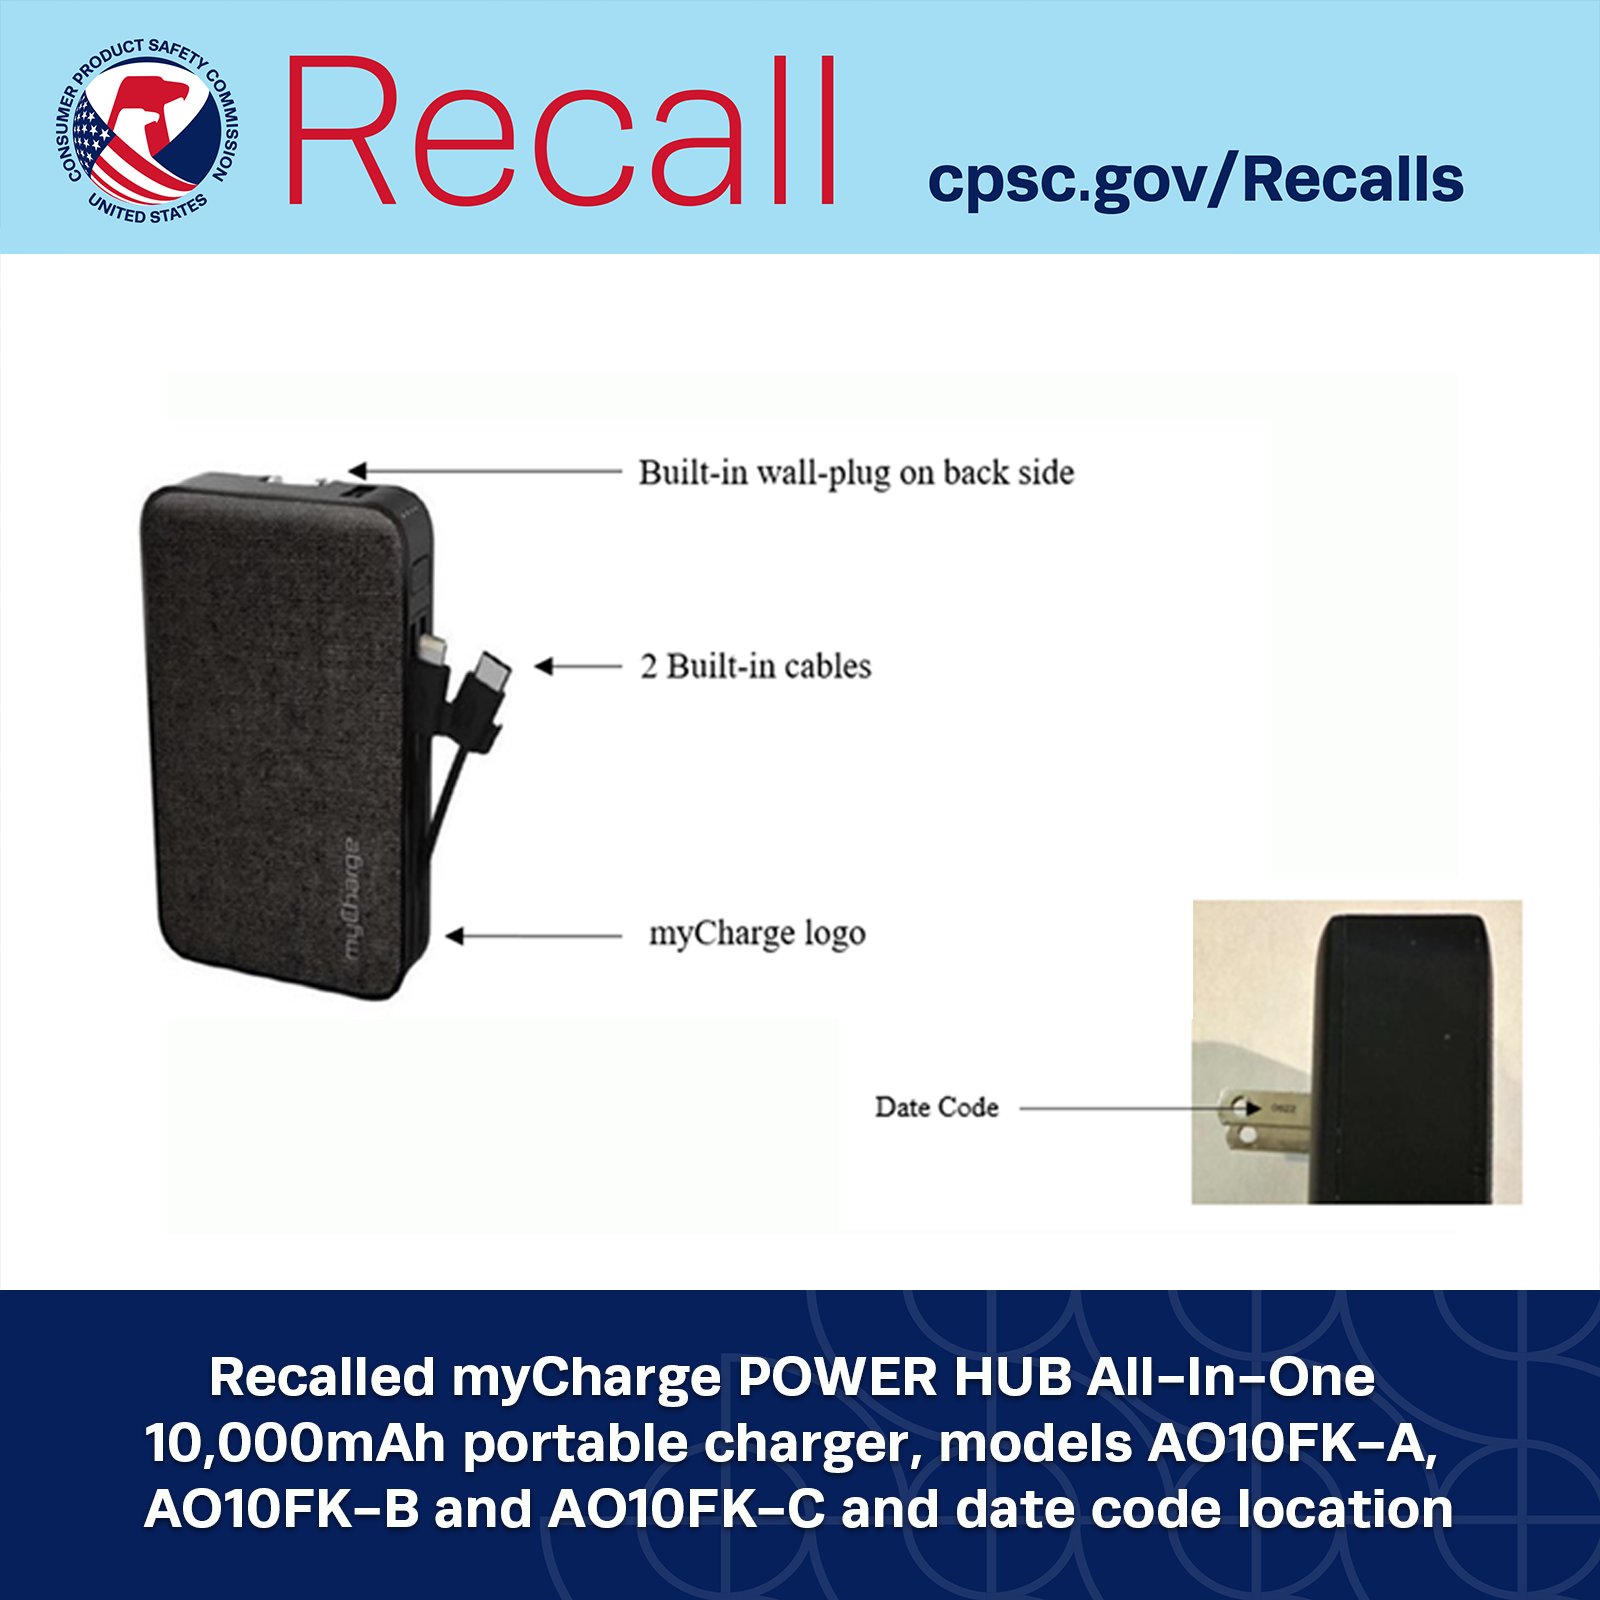 Recalled myCharge POWER HUB All-In-One 10,000mAh portable charger, models AO10FK-A, AO10FK-B and AO10FK-C and date code location 